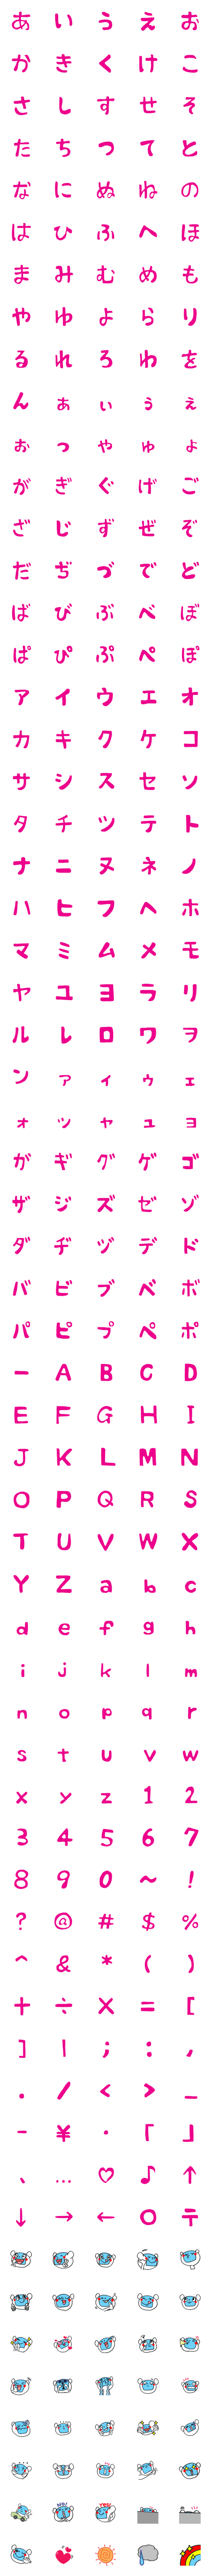 [LINE絵文字]ロボちゃん 絵文字。の画像一覧